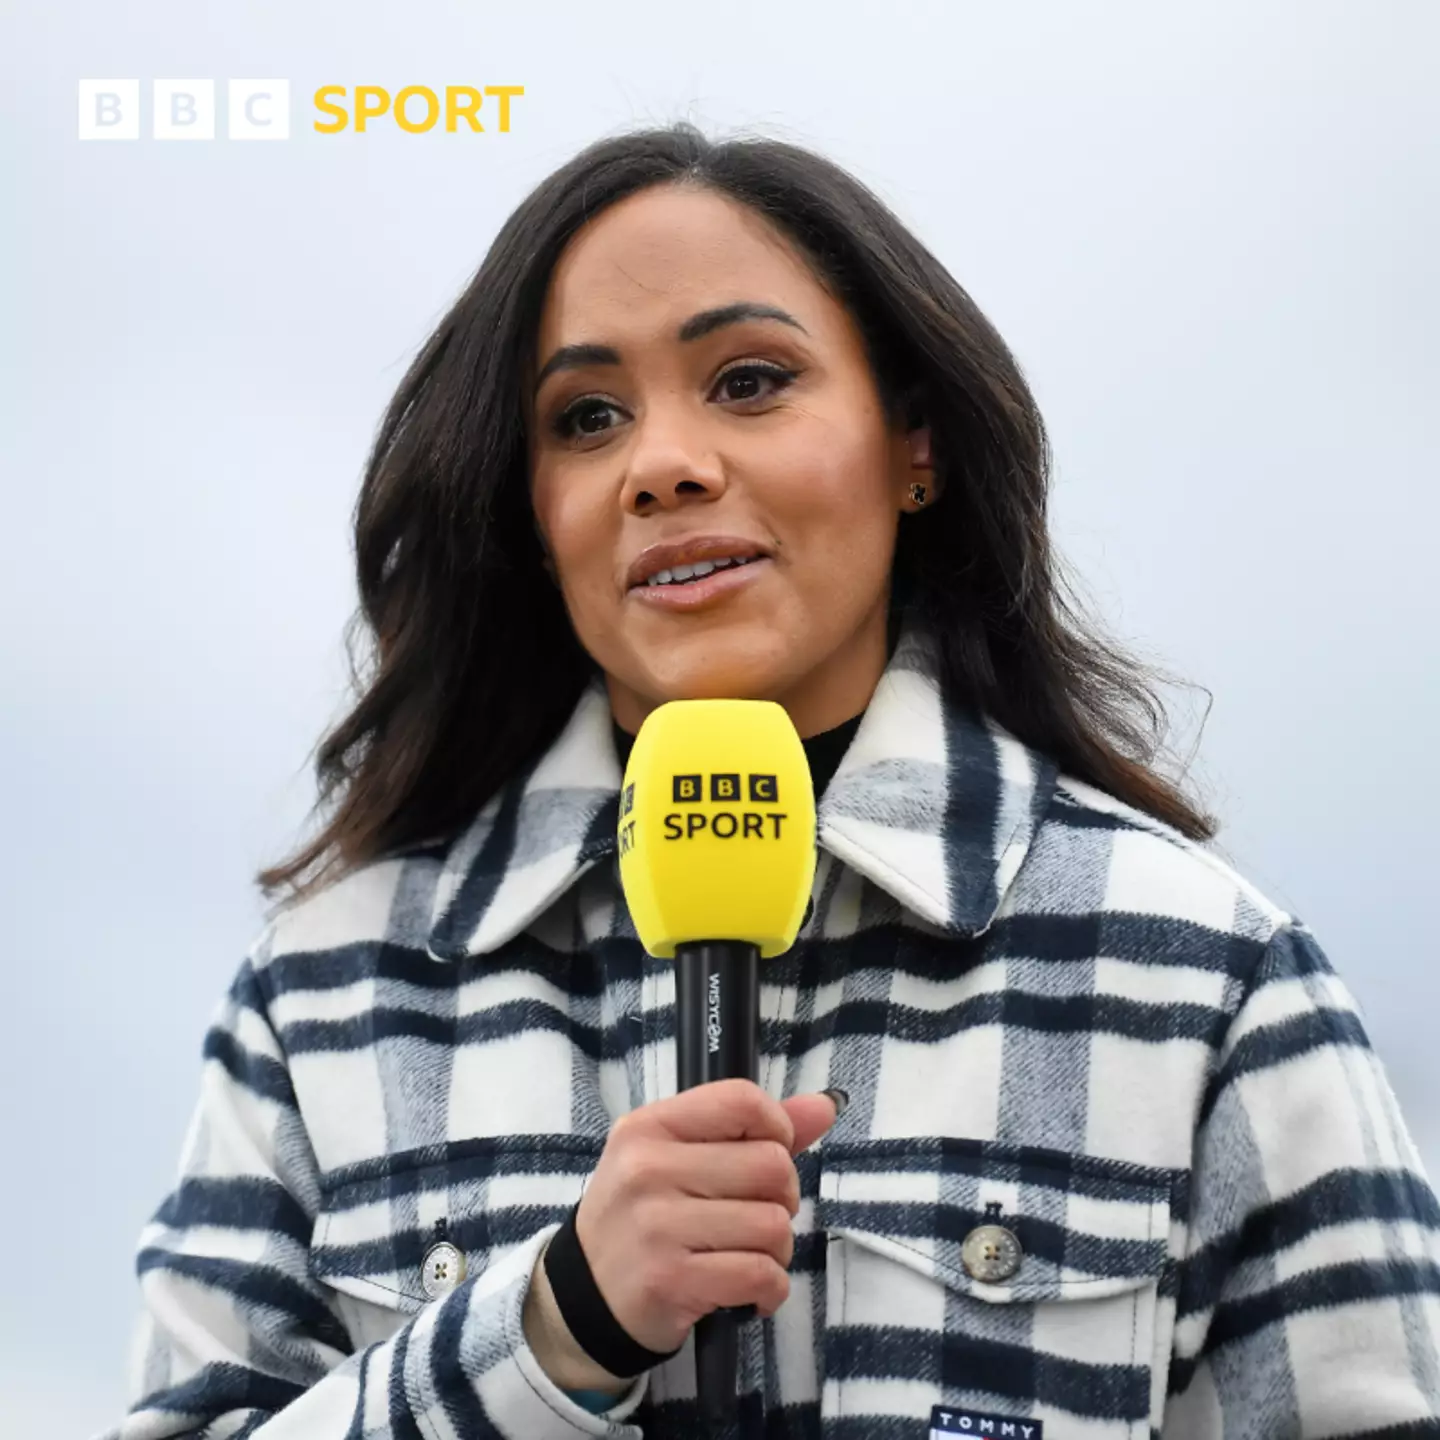 BBC Sport announced that Alex Scott will be stepping in for Lineker.